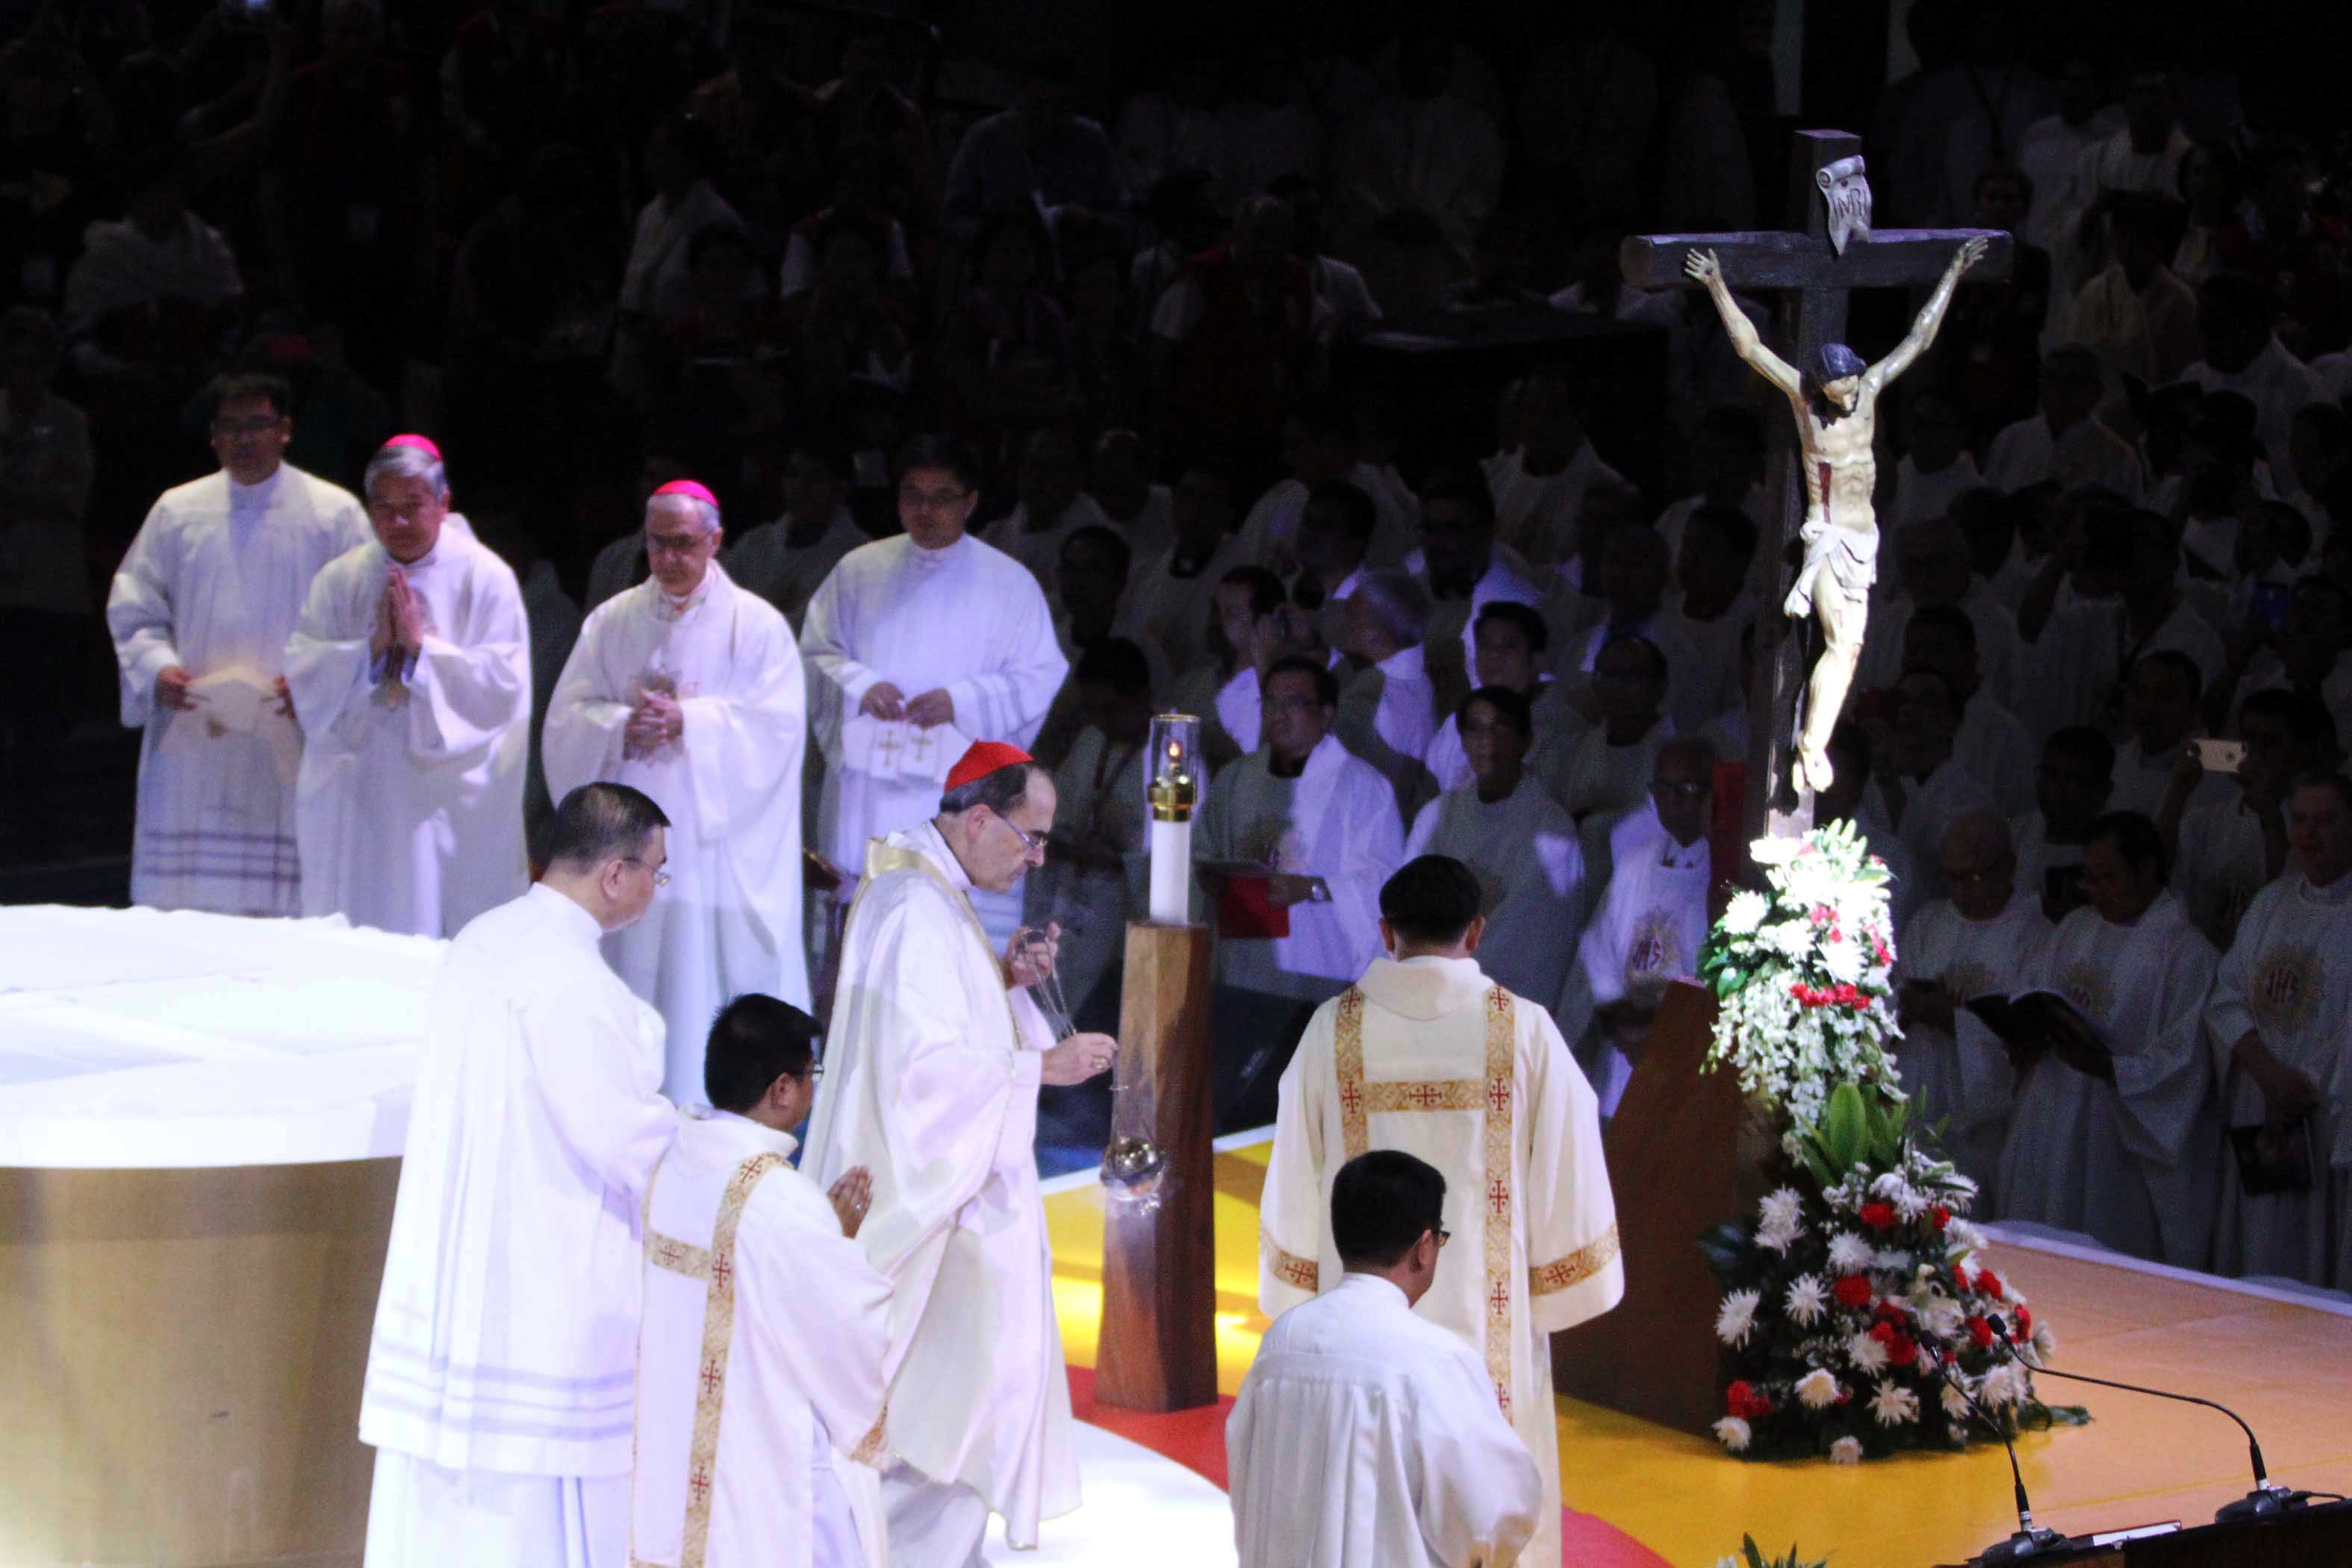 H.E. Philippe Cardinal Barbarin, D.D., Archbishop of Lyon, France celebrates  the Most Holy Eucharist at day 2 of 4th World Apostolic Congress on Mercy